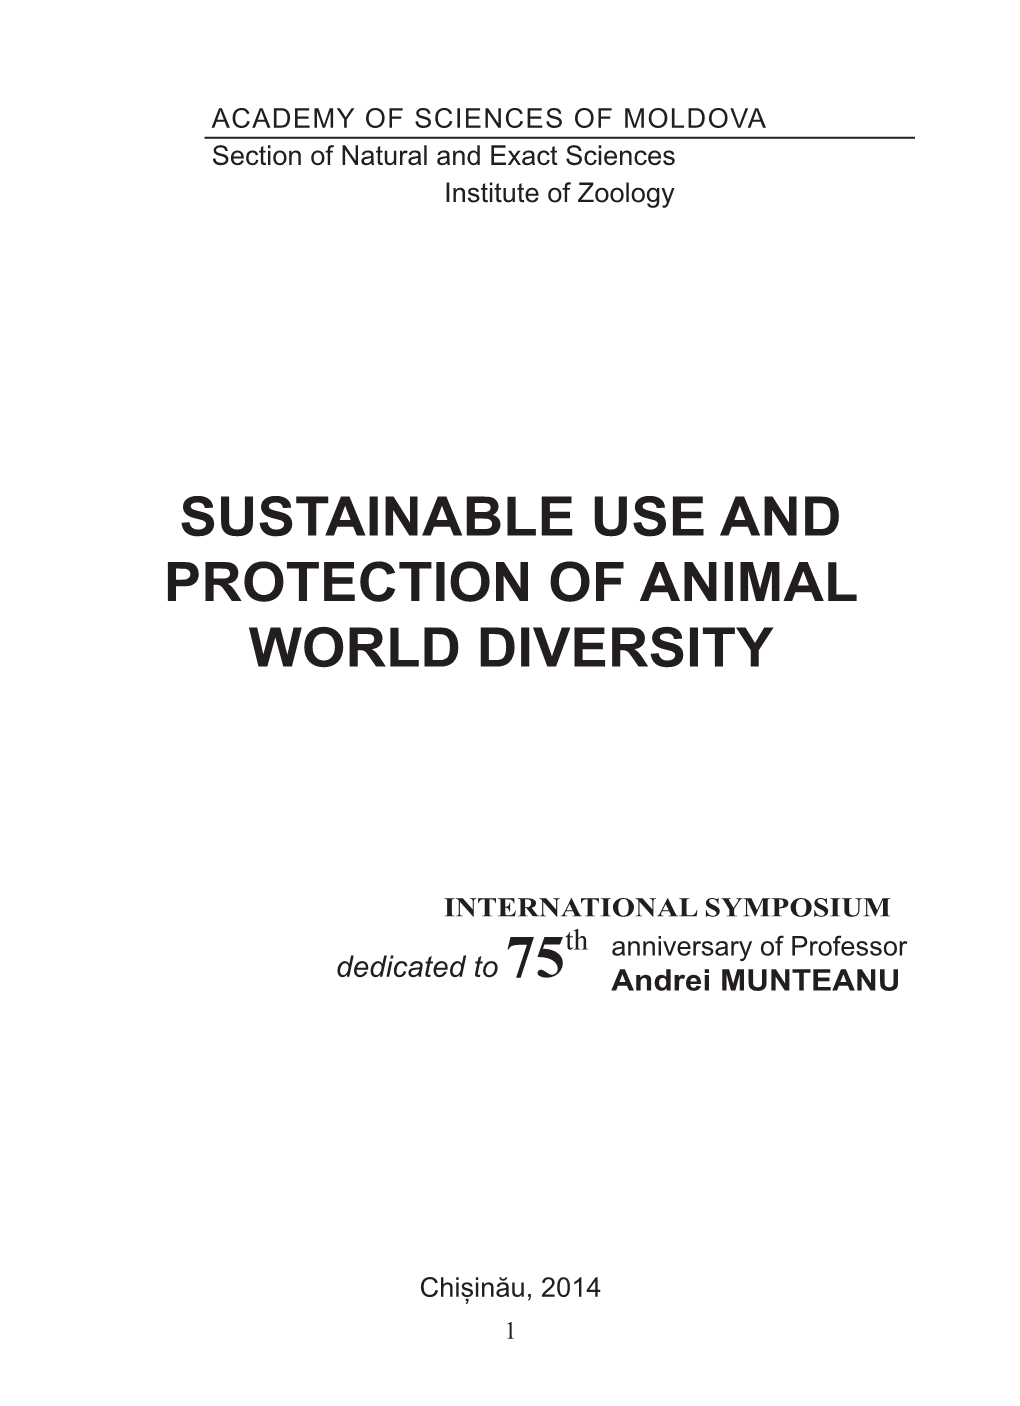 Sustainable Use and Protection of Animal World Diversity